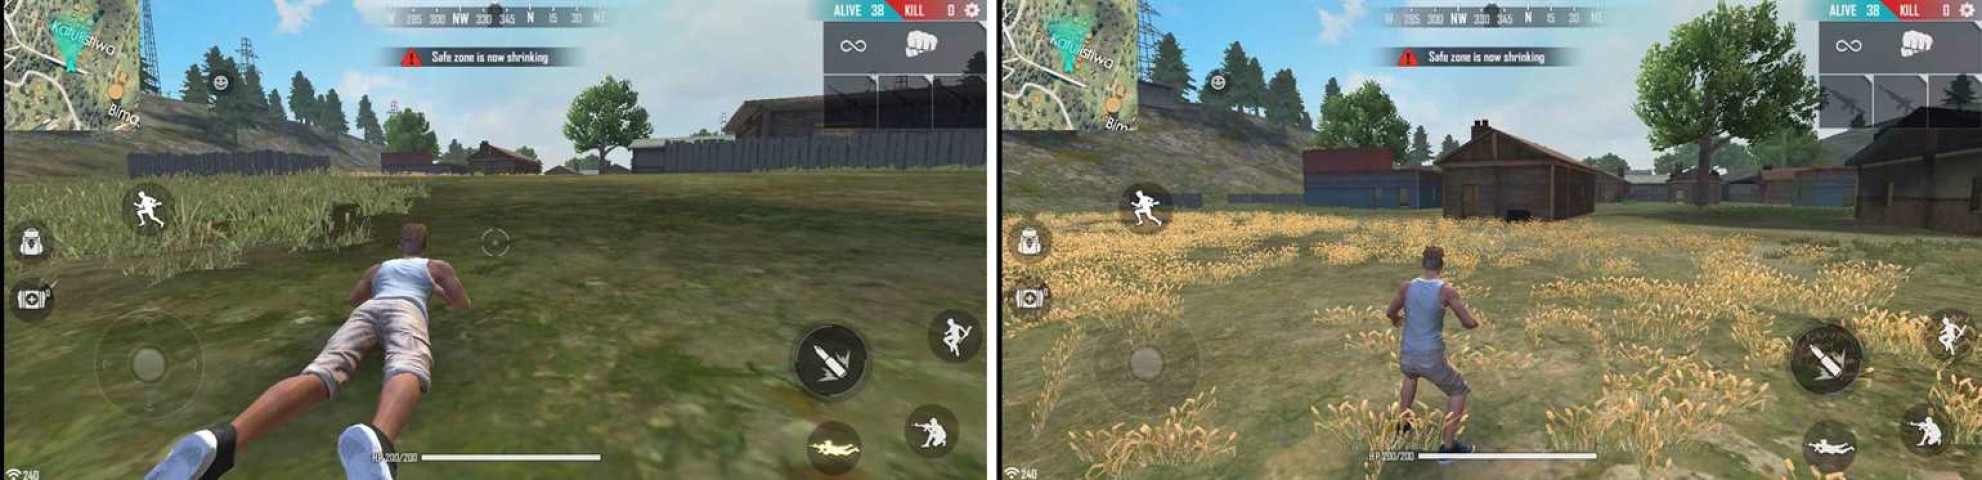 godsteam-free-fire-apk-for-android.jpg